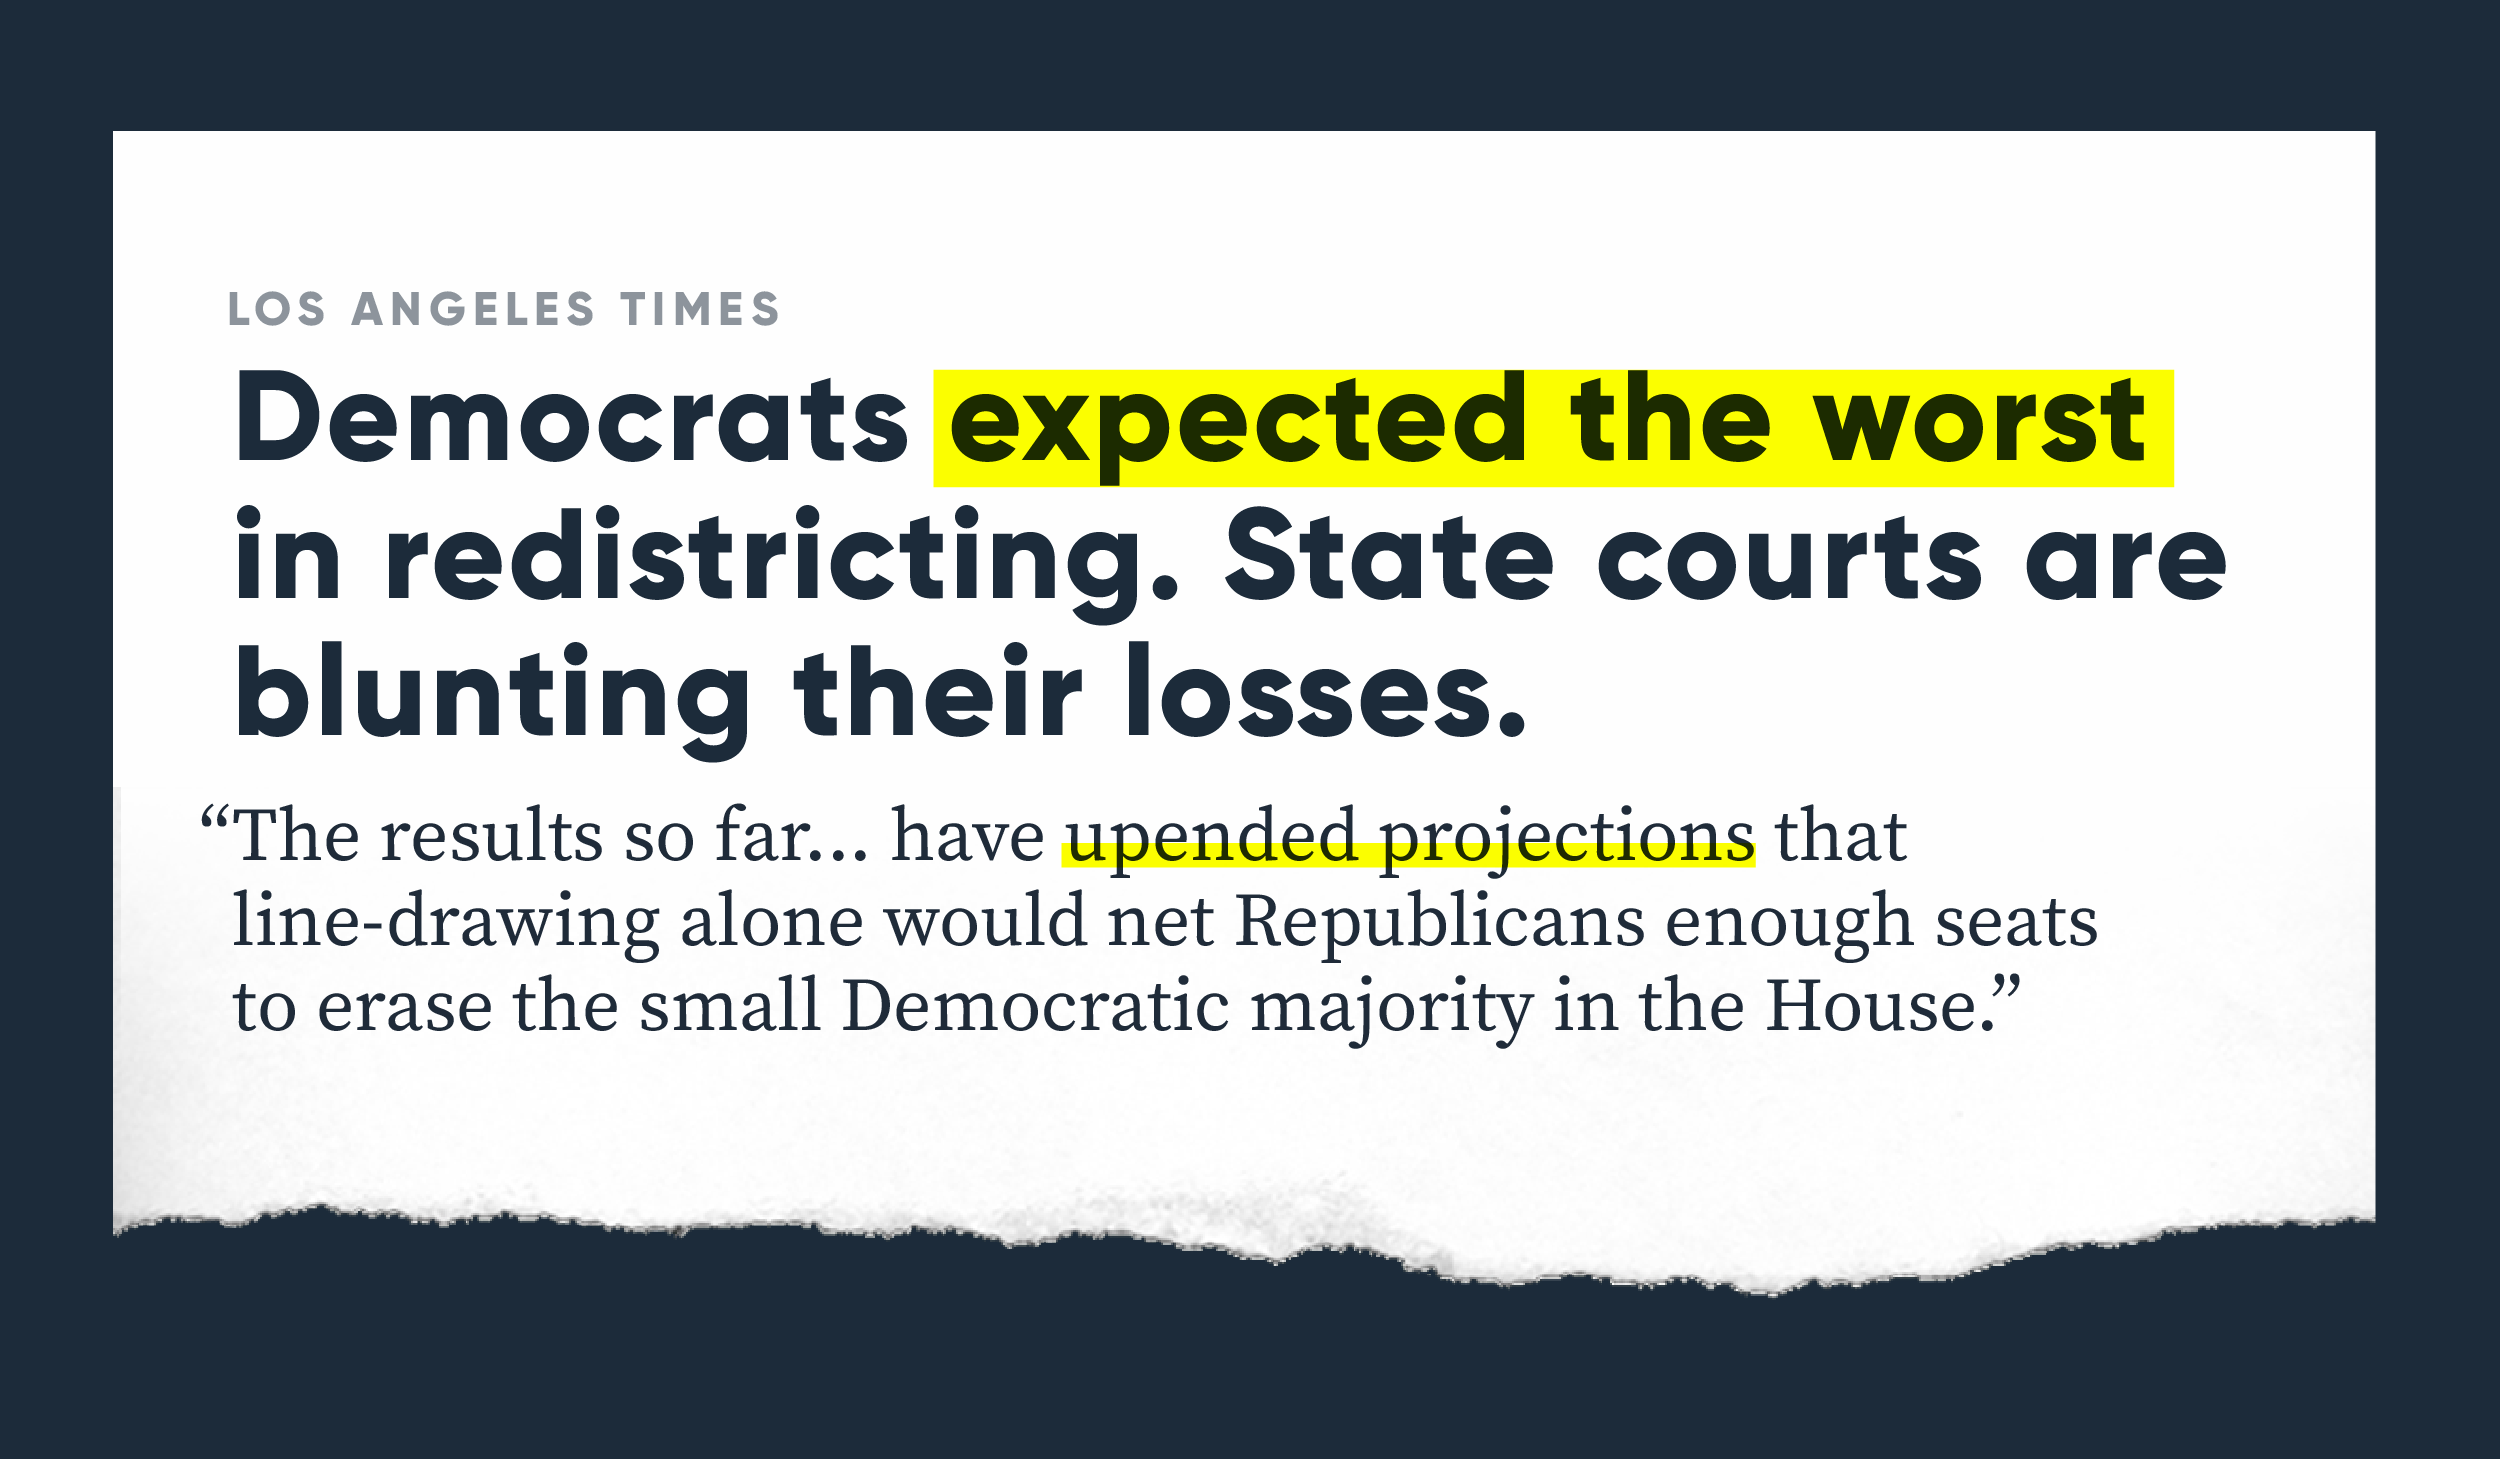 Los Angeles Times: “Democrats expected the worst in redistricting. State courts are blunting their losses” "The results so far... have upended projections that line-drawing alone would net Republicans enough seats to erase the small Democratic majority in the House."